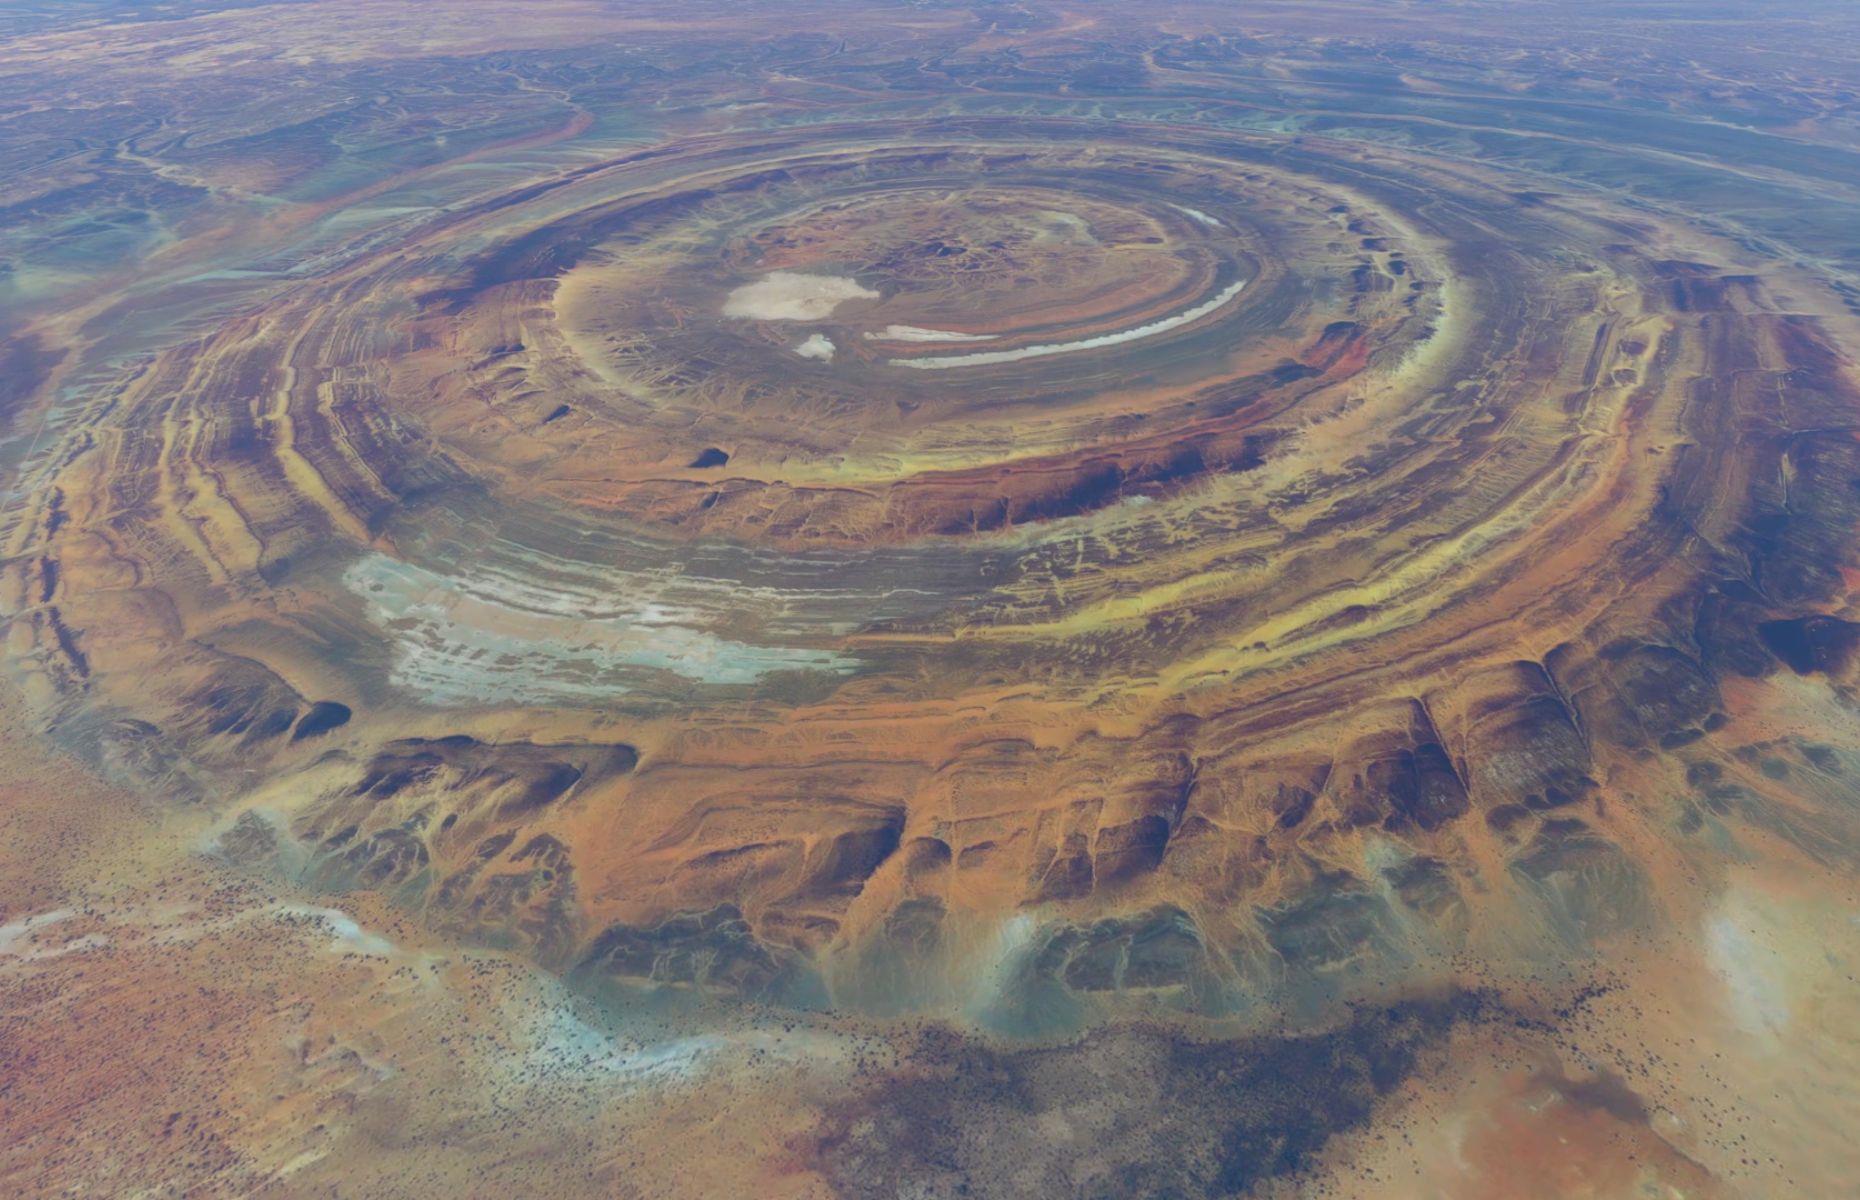 <p>This strange natural formation in the heart of the Sahara Desert only became widely known when we began sending humans into space. Dubbed Eye of the Sahara, because it appears to be gazing out to other planets, the Richat Structure was first captured on camera by astronauts on NASA’s Gemini IV mission in 1965. It’s thought that only a handful of local people previously knew of the geological oddity, which spans across a 25-mile (40km) region in Mauritania, northwest Africa.</p>